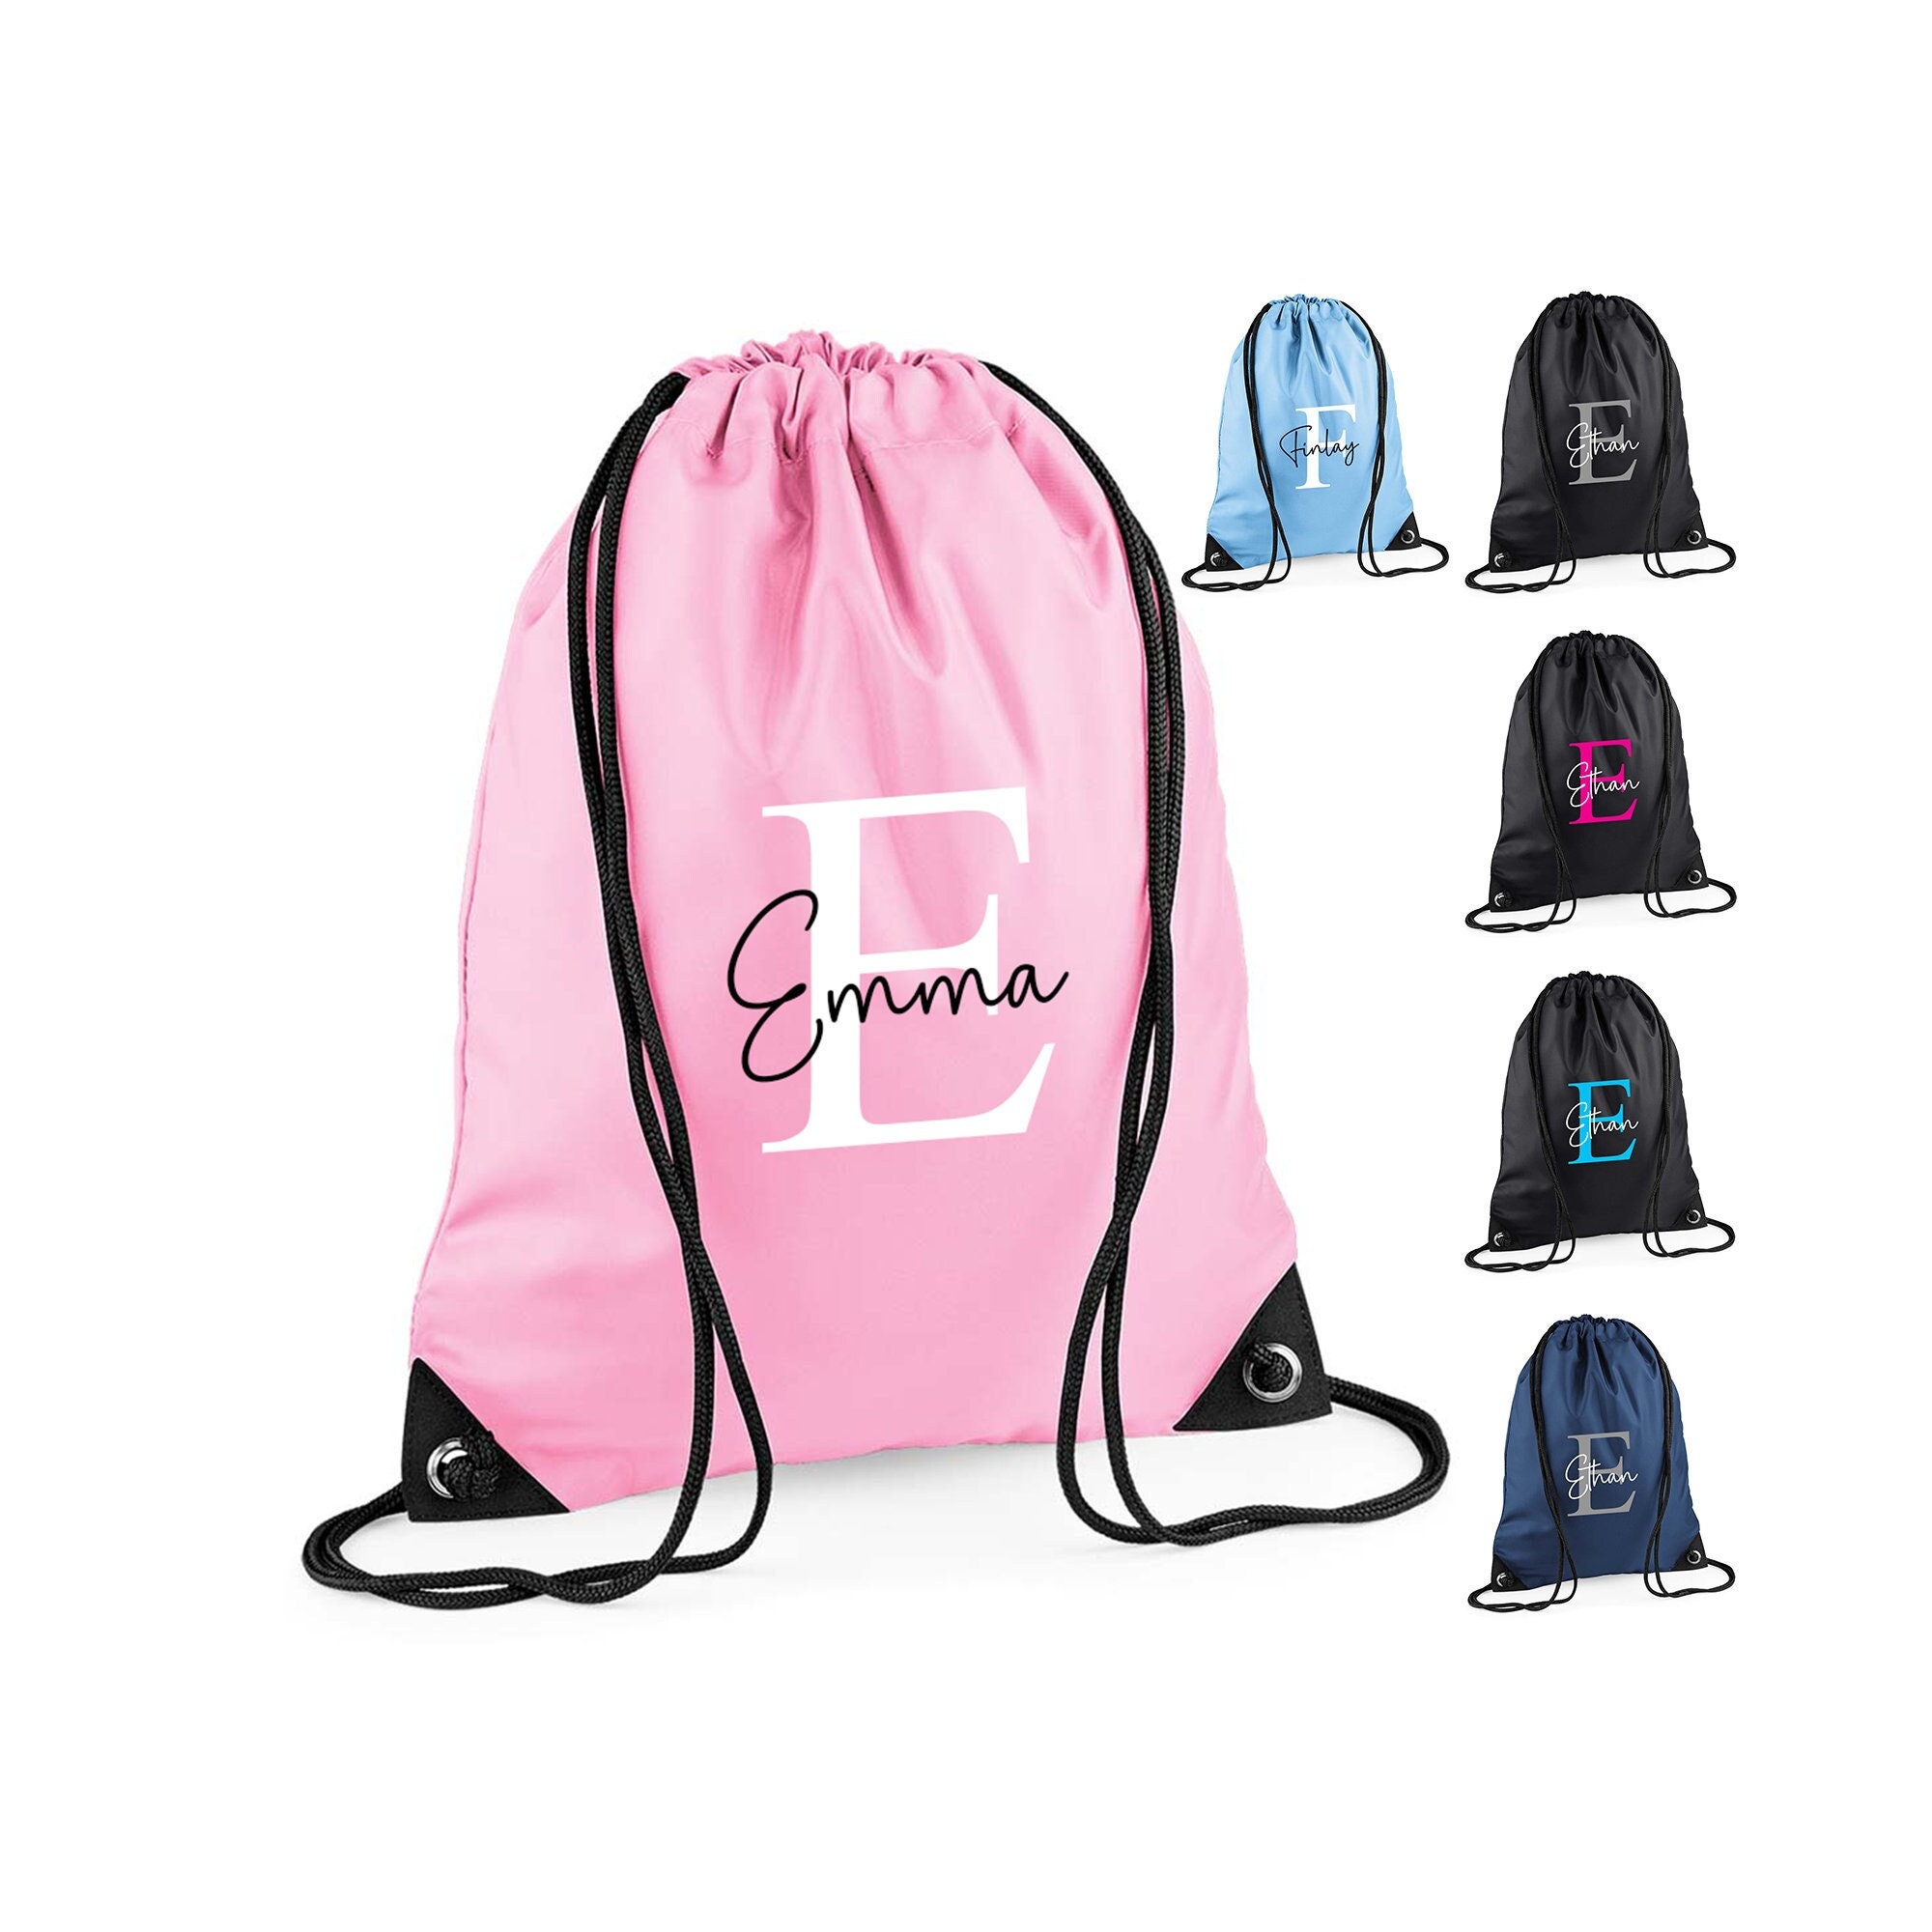 Personalized Favor Bags - Personalize Logo Name Brand Print Drawstring Bags  Custom Small fine Cotton Canvas Bag Gift Drawstring Pouches Jewelry  Packaging Bags – BOSTON CREATIVE COMPANY